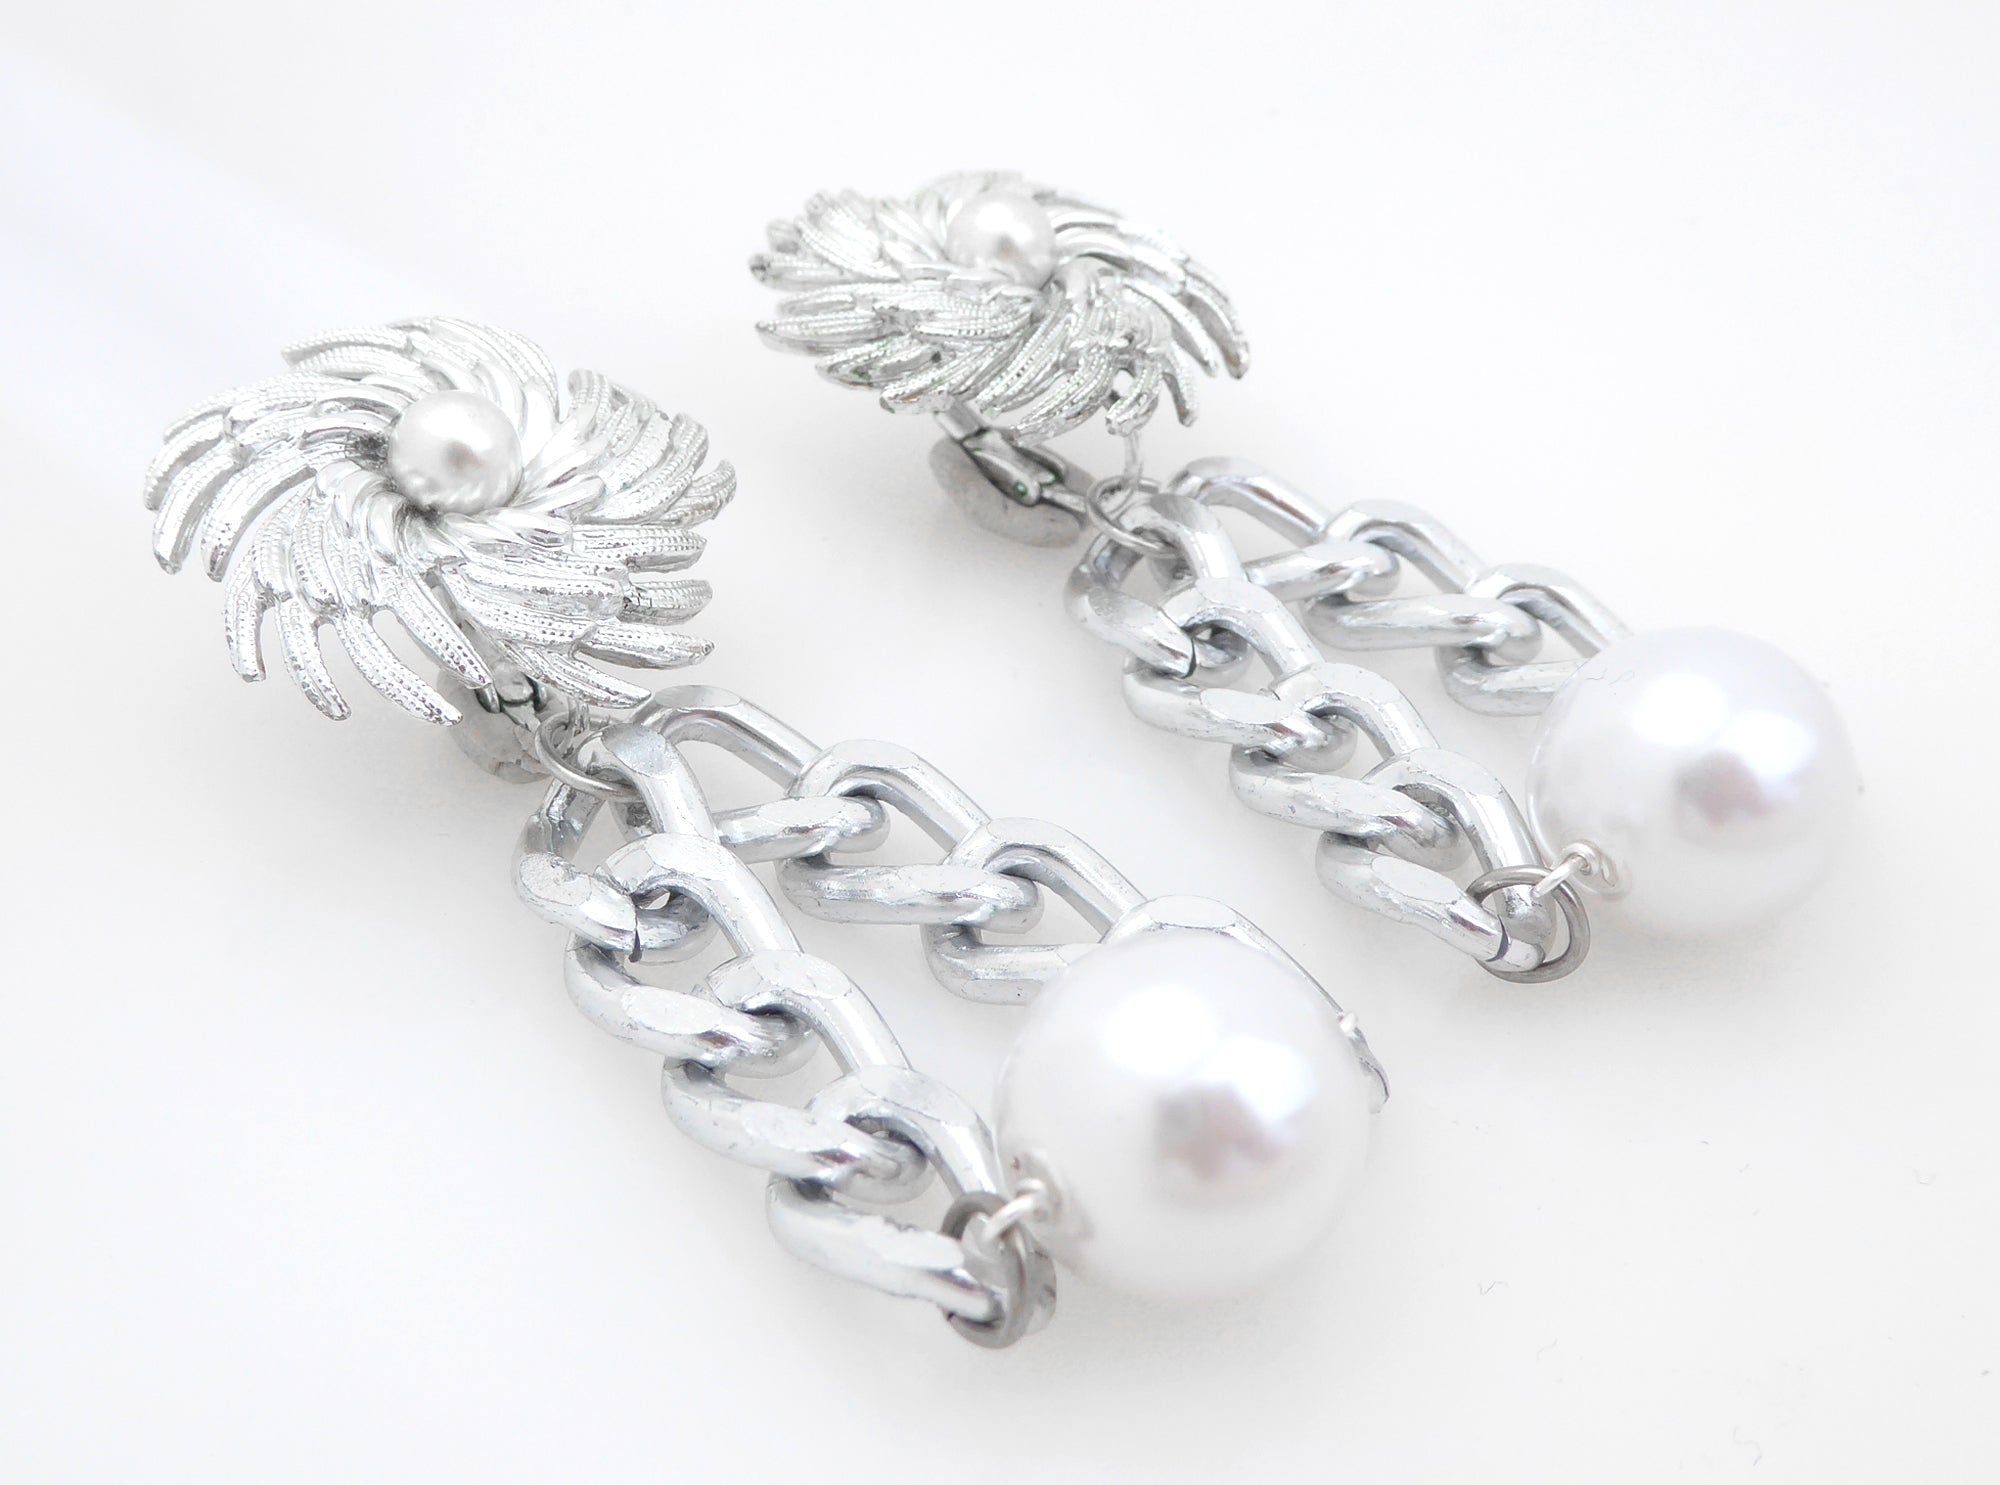 Vintage silver dahlia pearl and chain earrings by Jenny Dayco 2